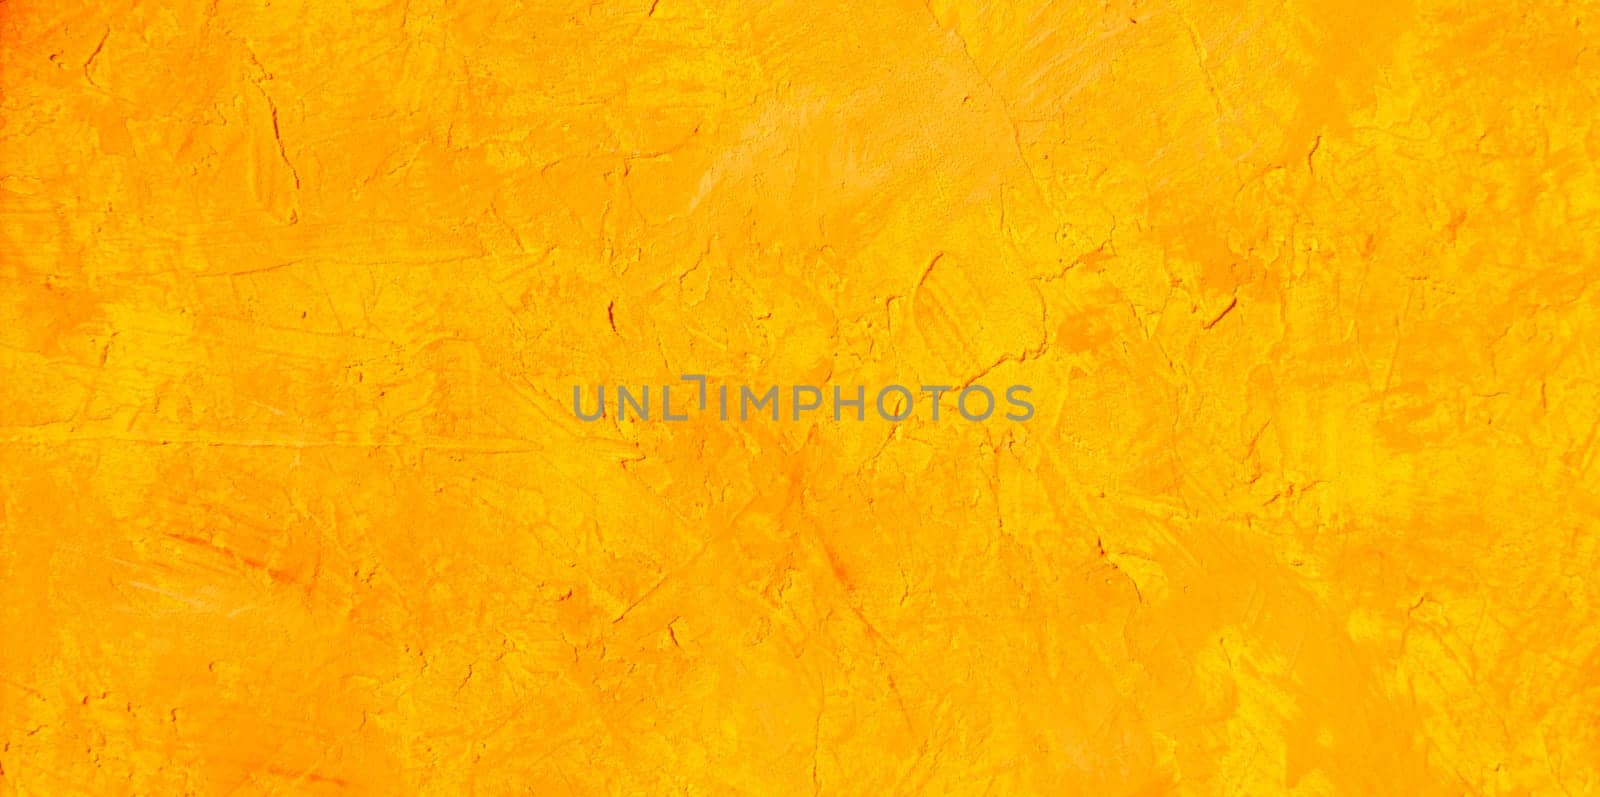 abstract orange background natural image textured abstract orange color background